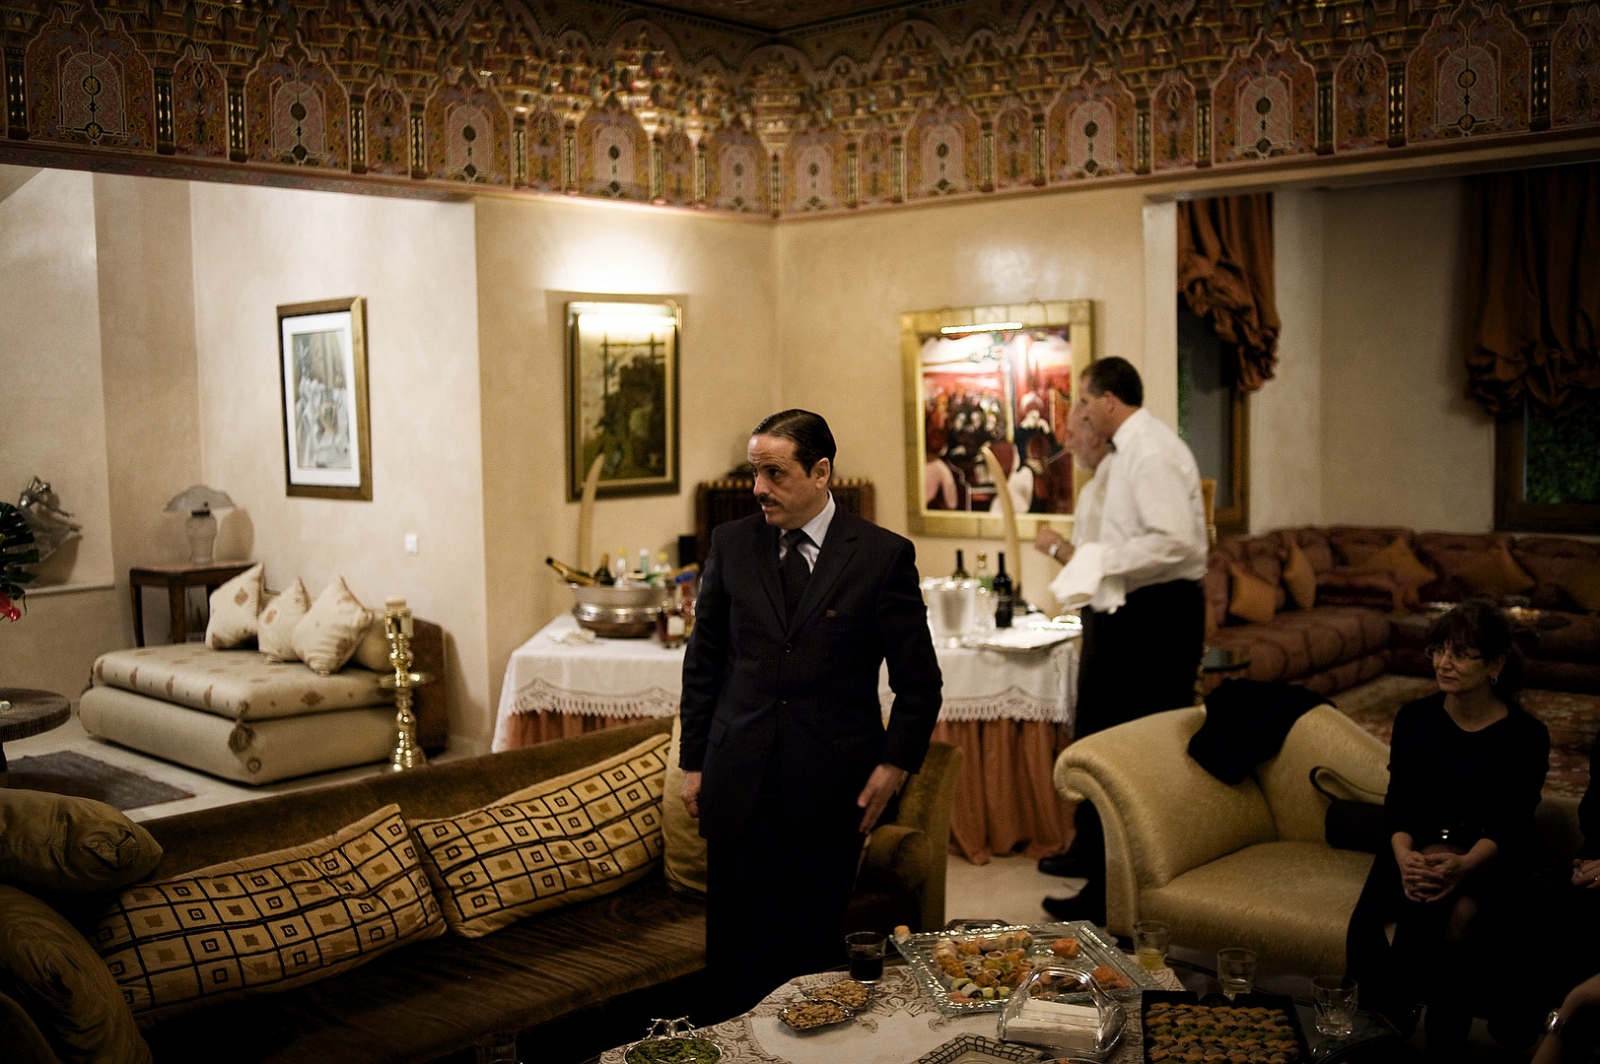  2010 - A wealthy Moroccan Jewish family holds a party for the Mamouna festival in Casablanca Morocco. The Mamouna is originally a Moroccan Jewish holiday when Jews opened their doors to their Muslim and Jewish neighbours to share in the festivities. 